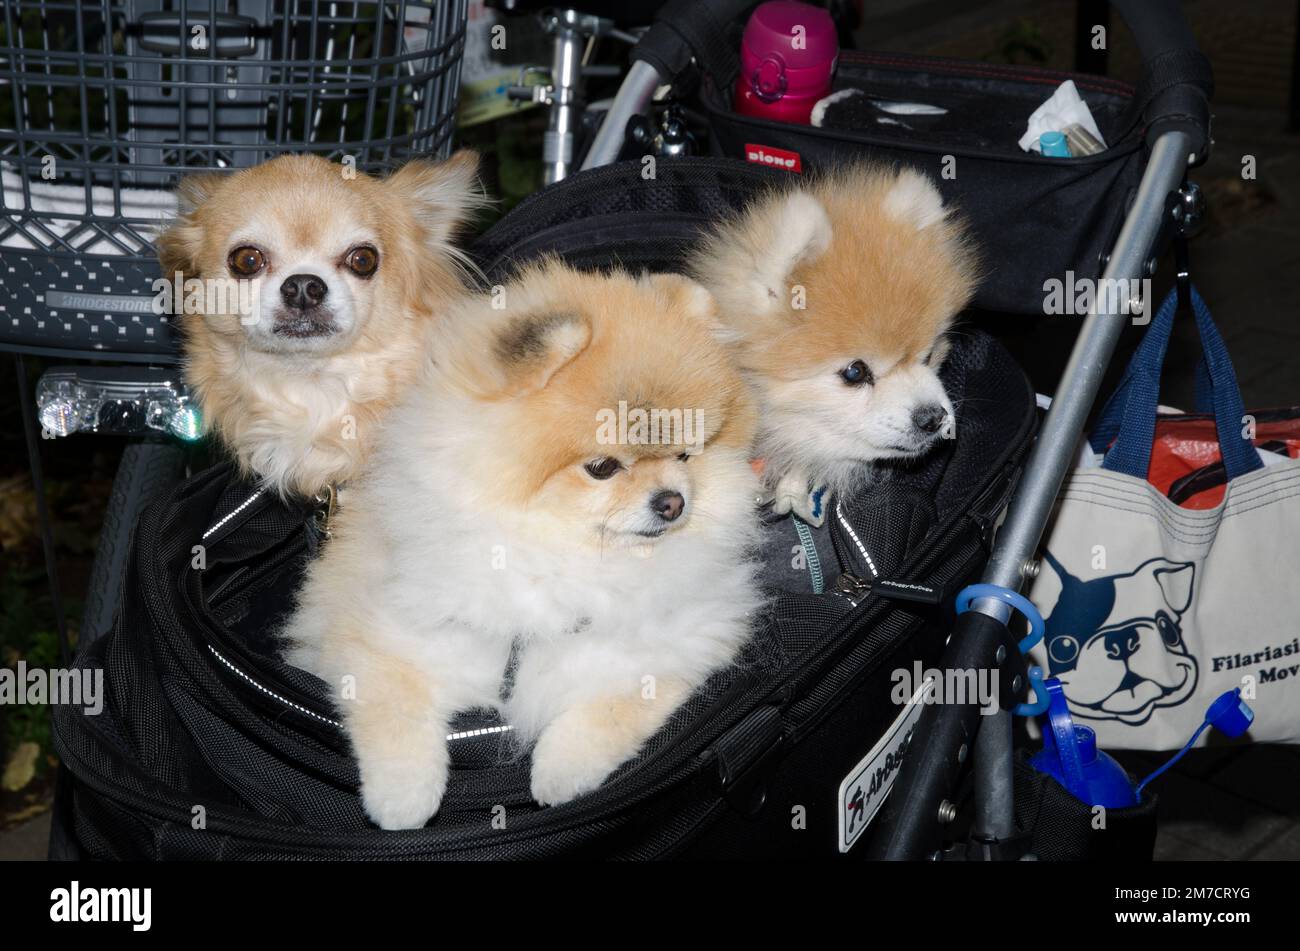 Ginza, December 14, 2017: Dogs in a baby buggy. Puppies of Akita breed in the center and to the right. Ginza. Tokyo. Japan. Stock Photo